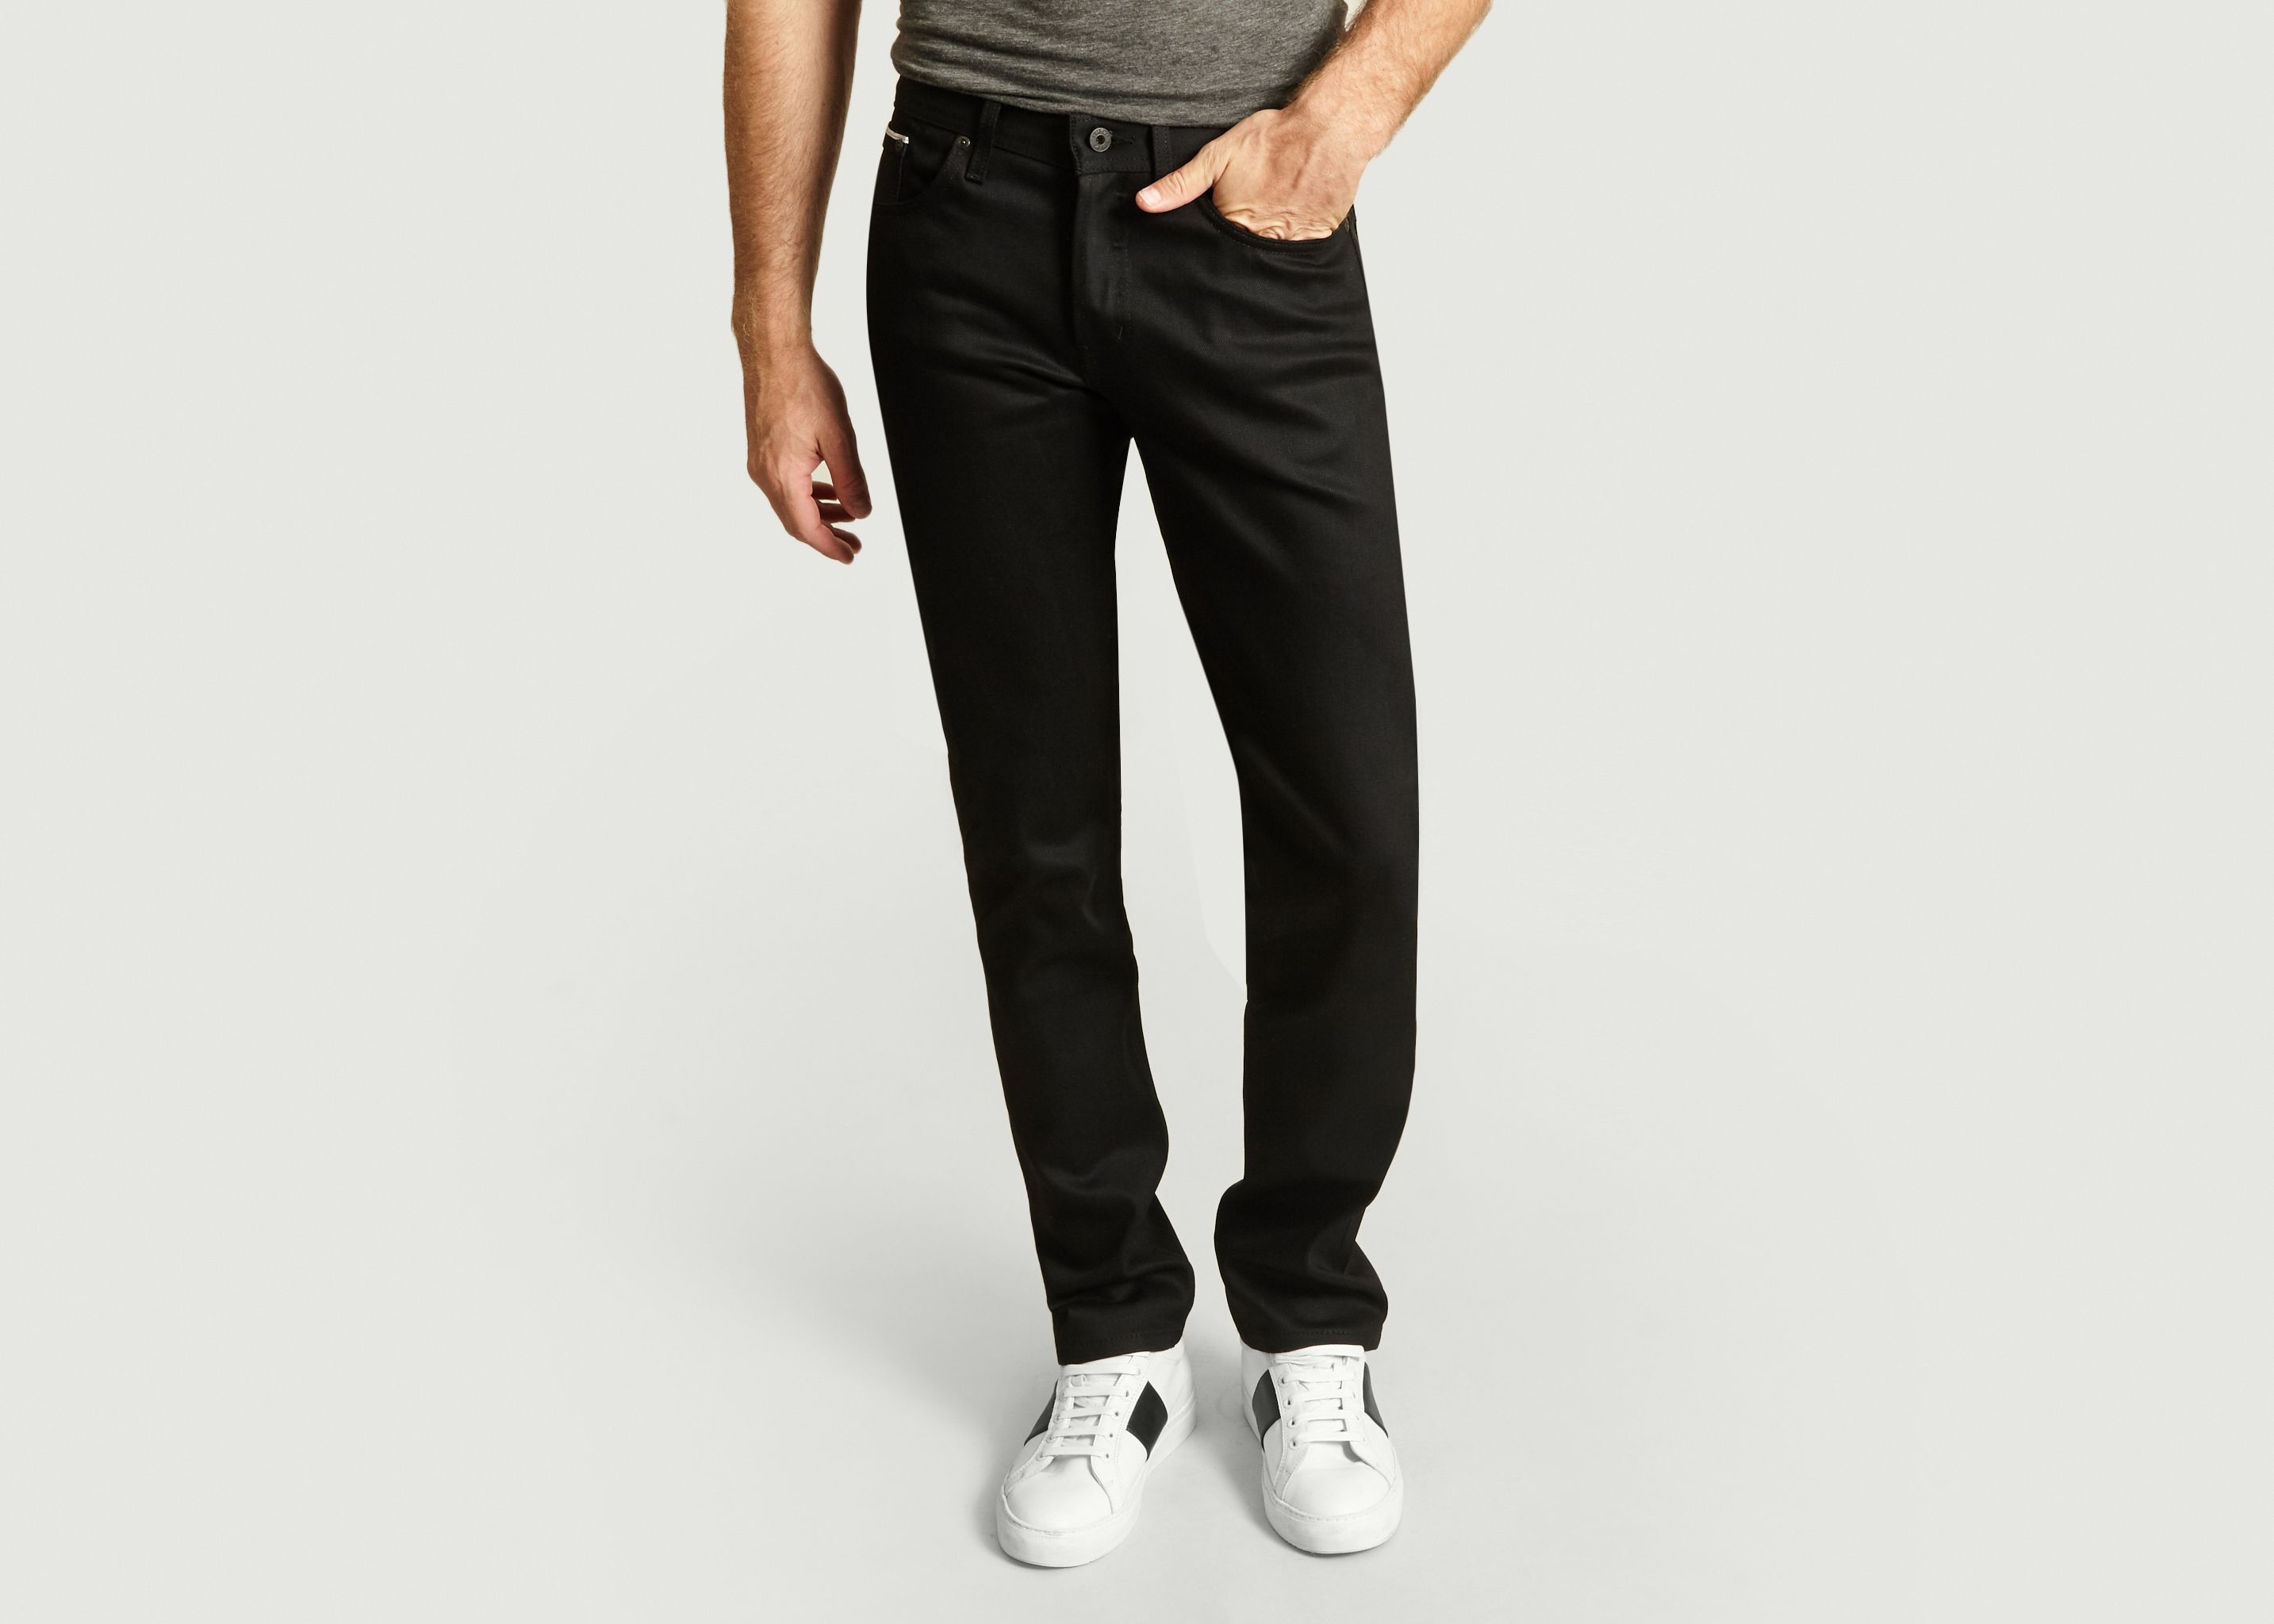 Weirdguy Guy Jeans Cobra Stretch - Naked and Famous